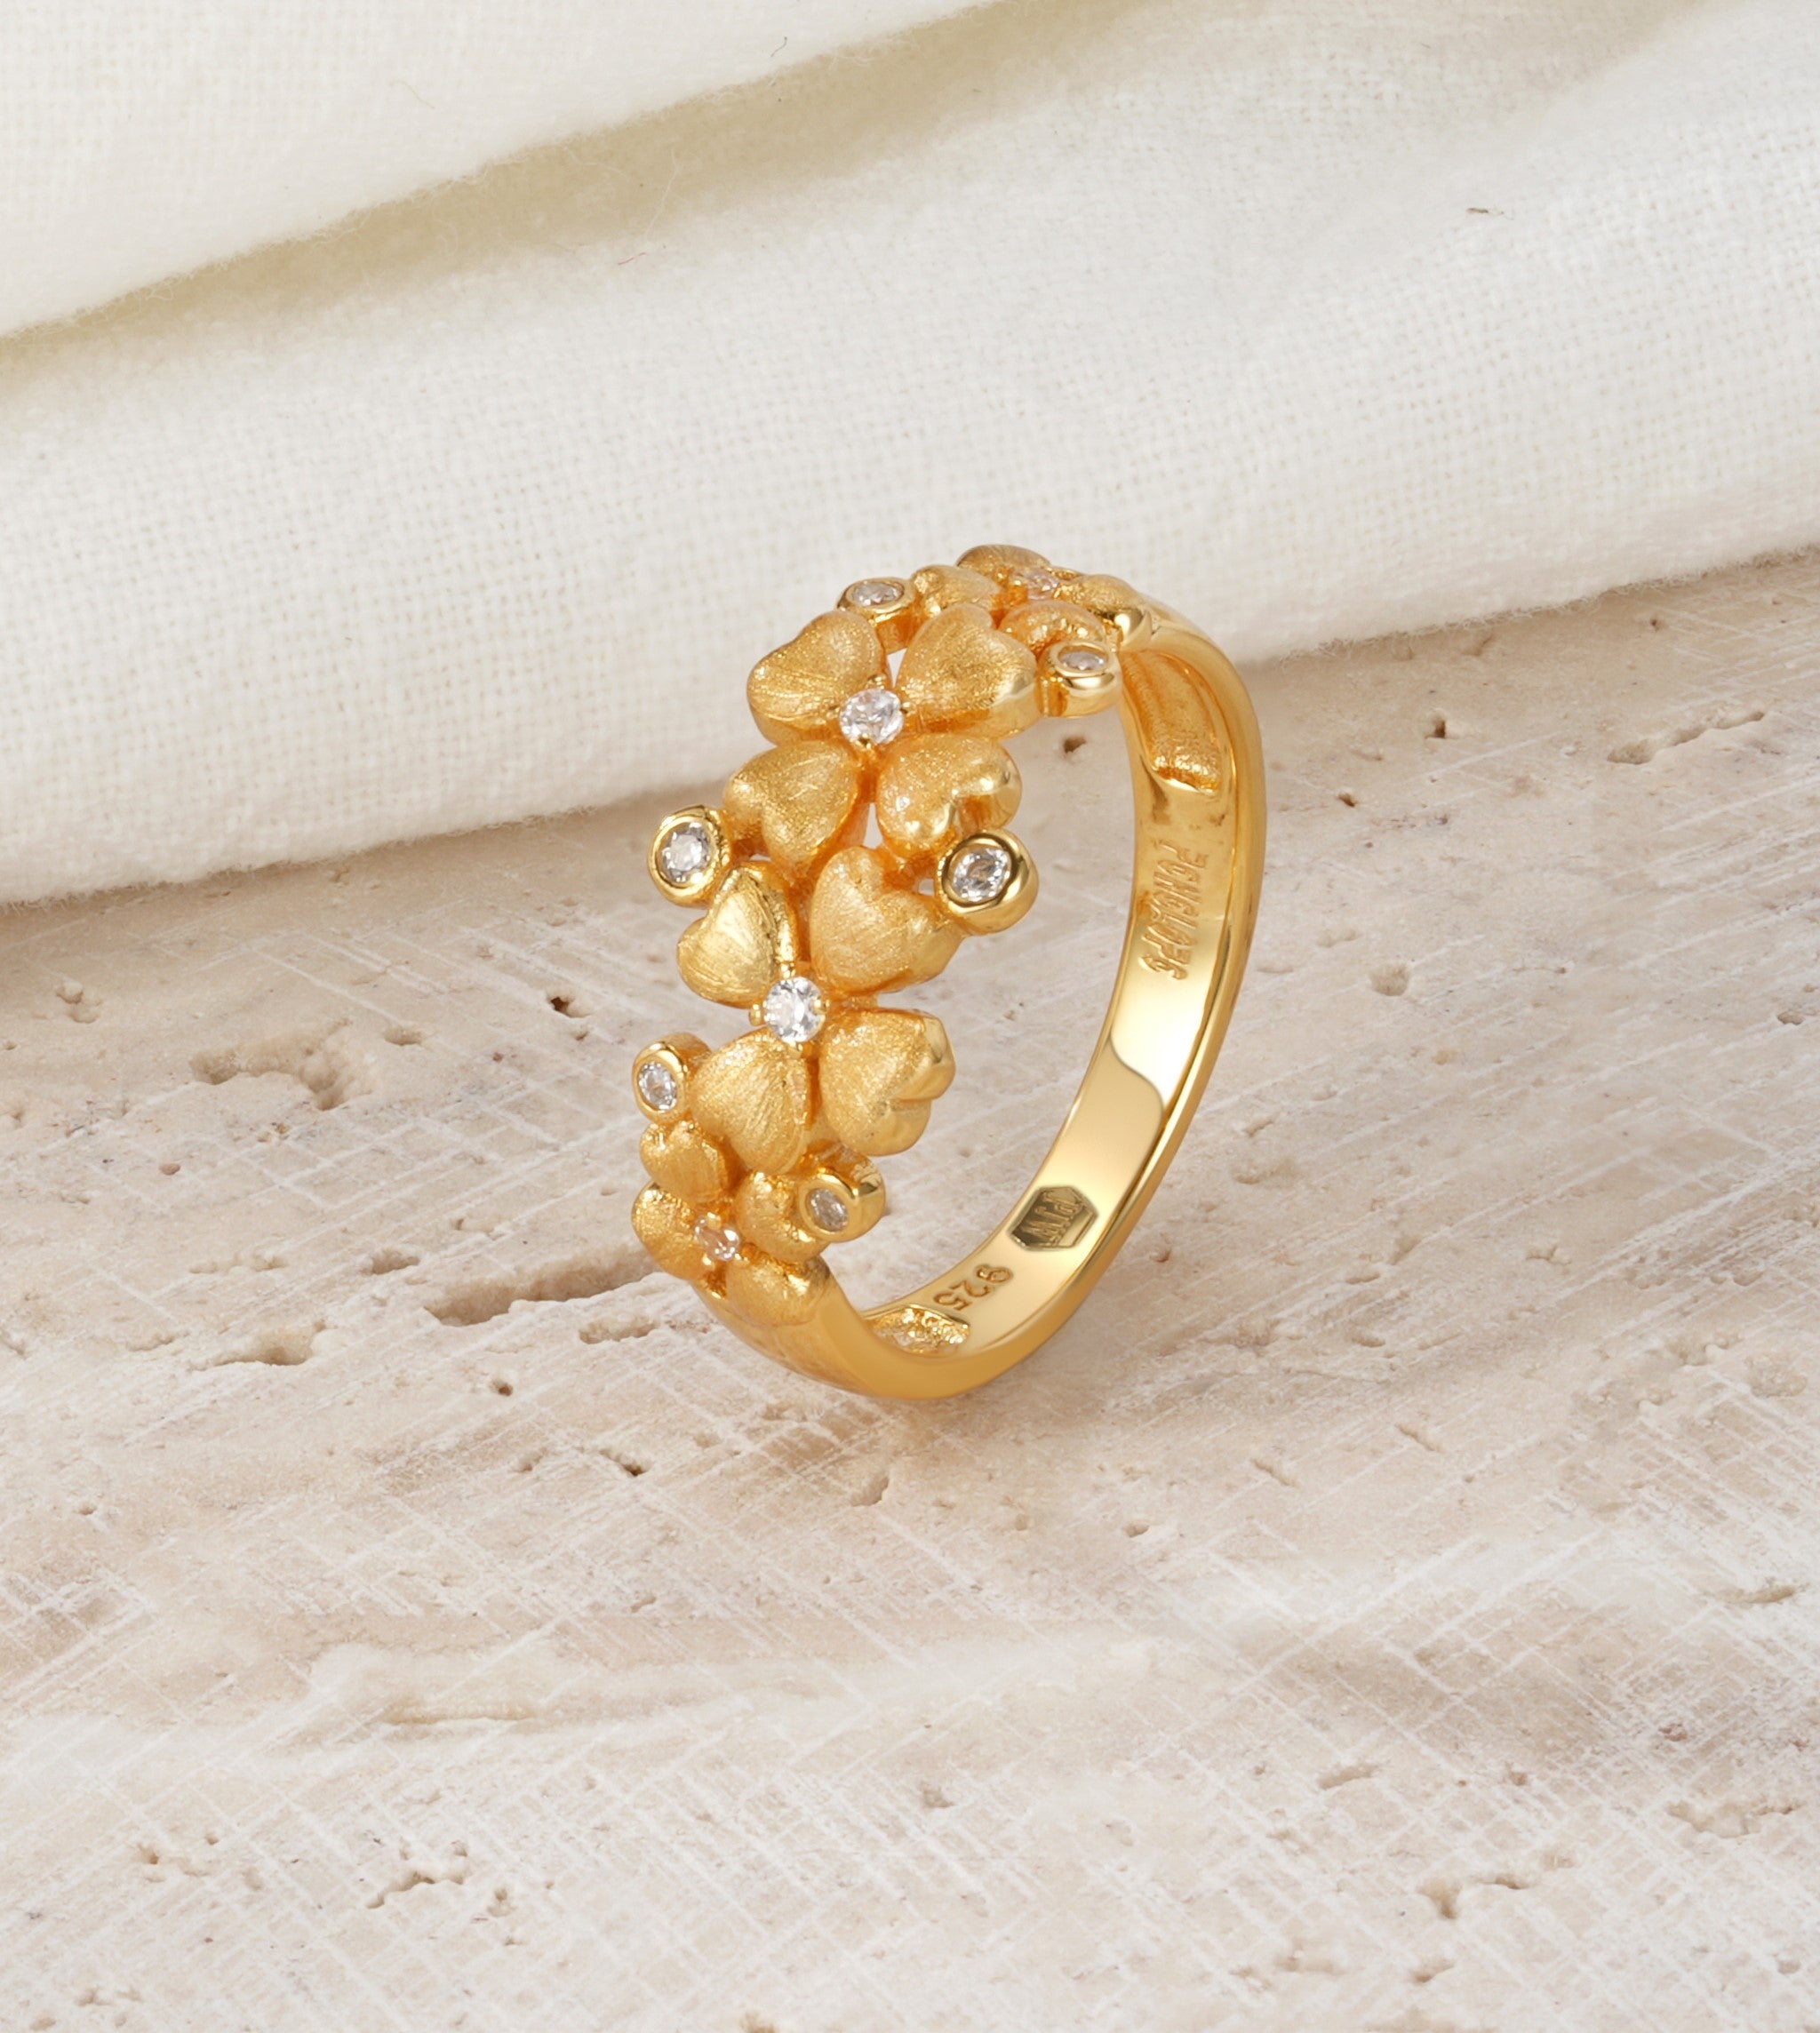 Floral silver ring, pink gold plated with zirconia stones.